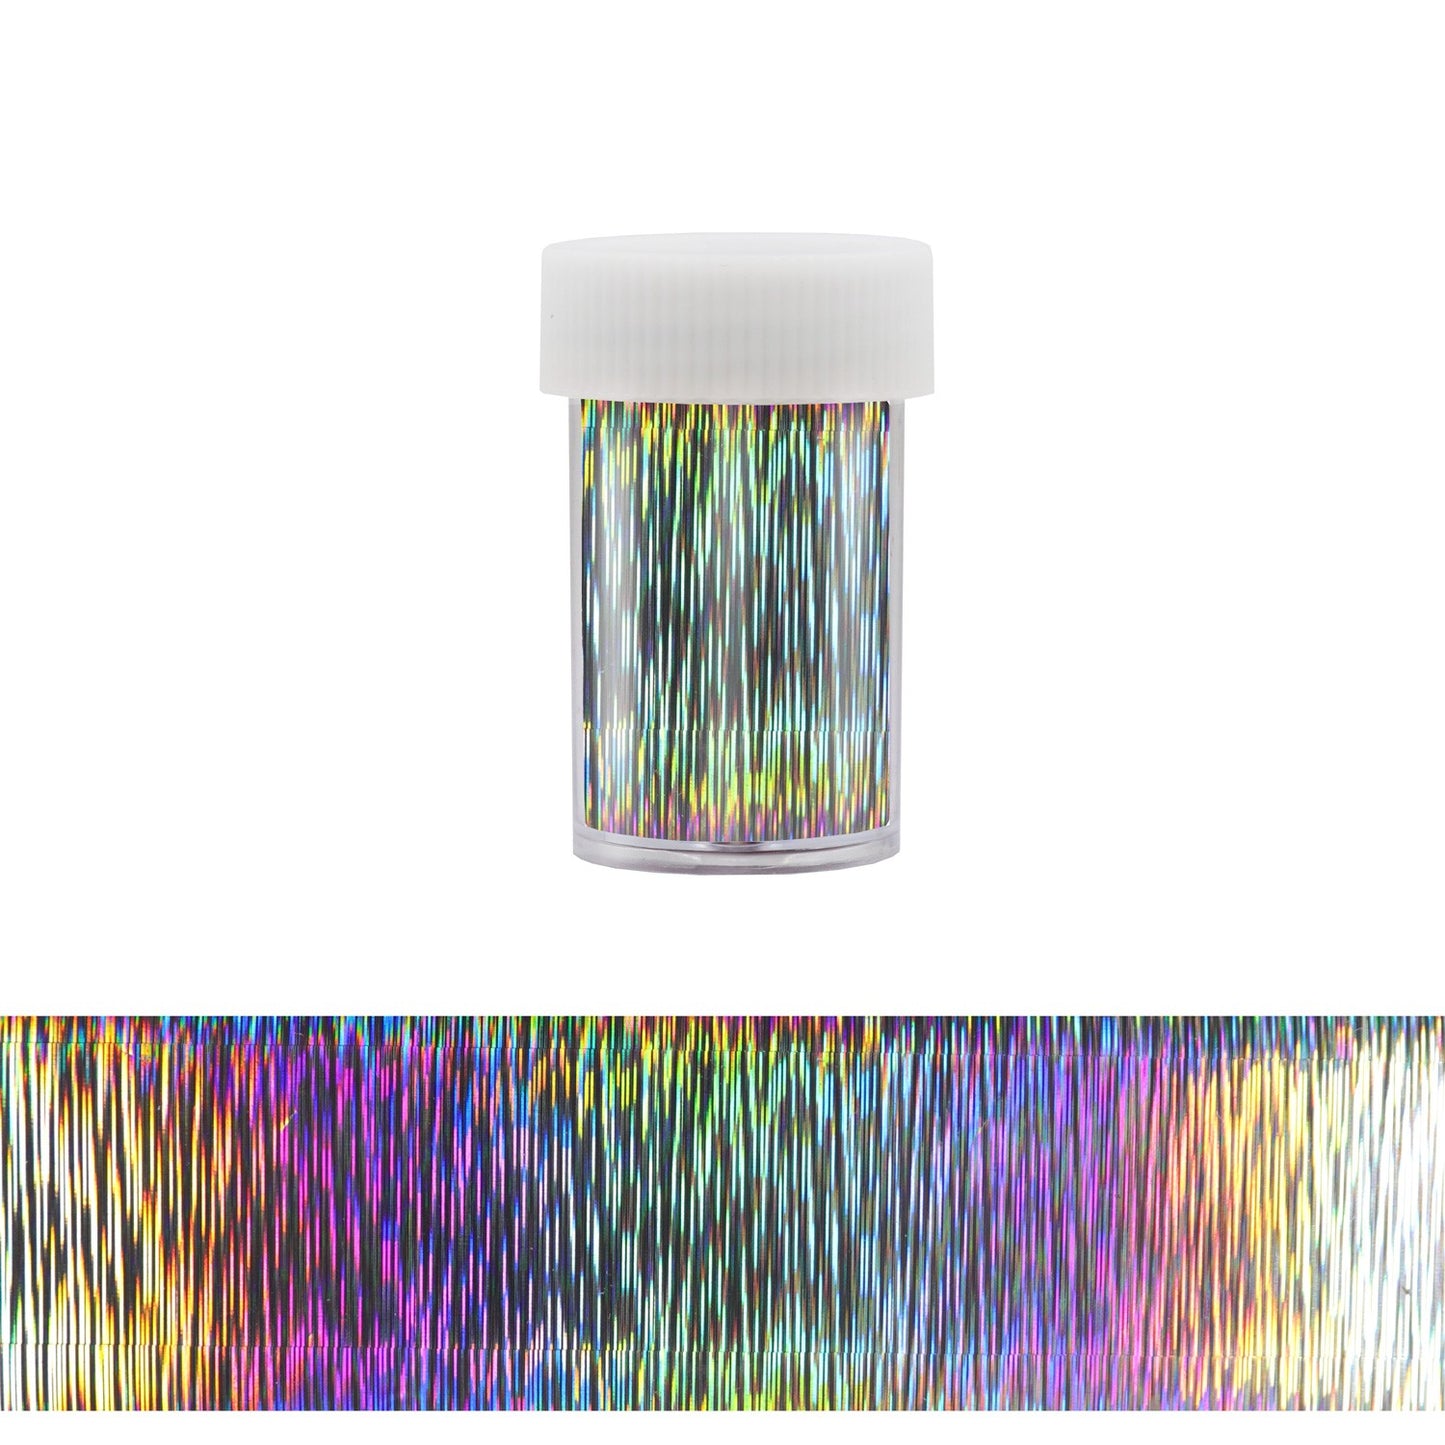 Nail Art Transfer Foil - Holographic Lines